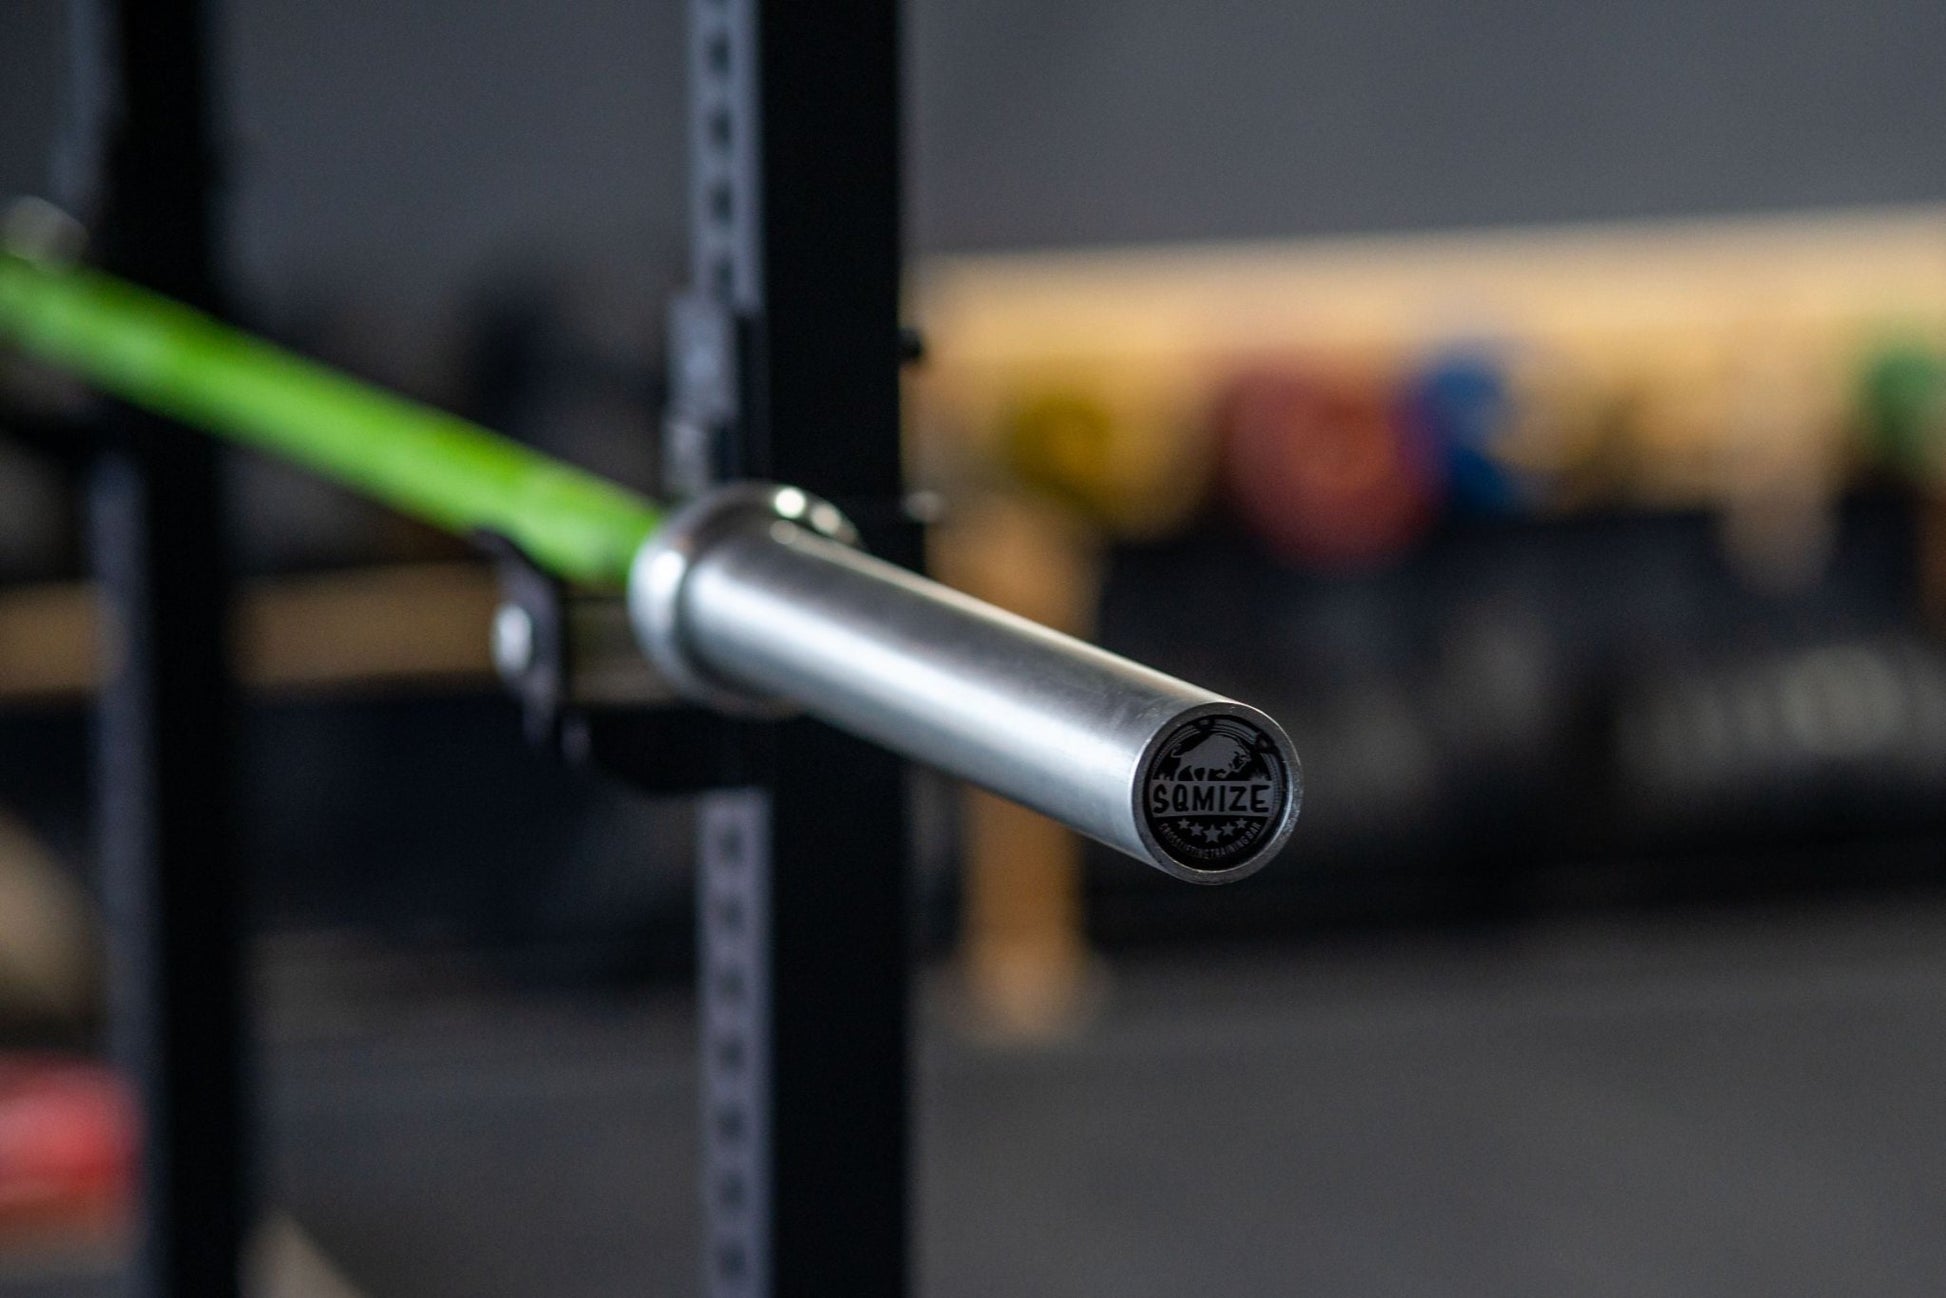 Olympia Barbell Crosslifting® SQMIZE® POWER PACK OB86CR-XE Ceramic Groen (20kg) - SQMIZE Nederland